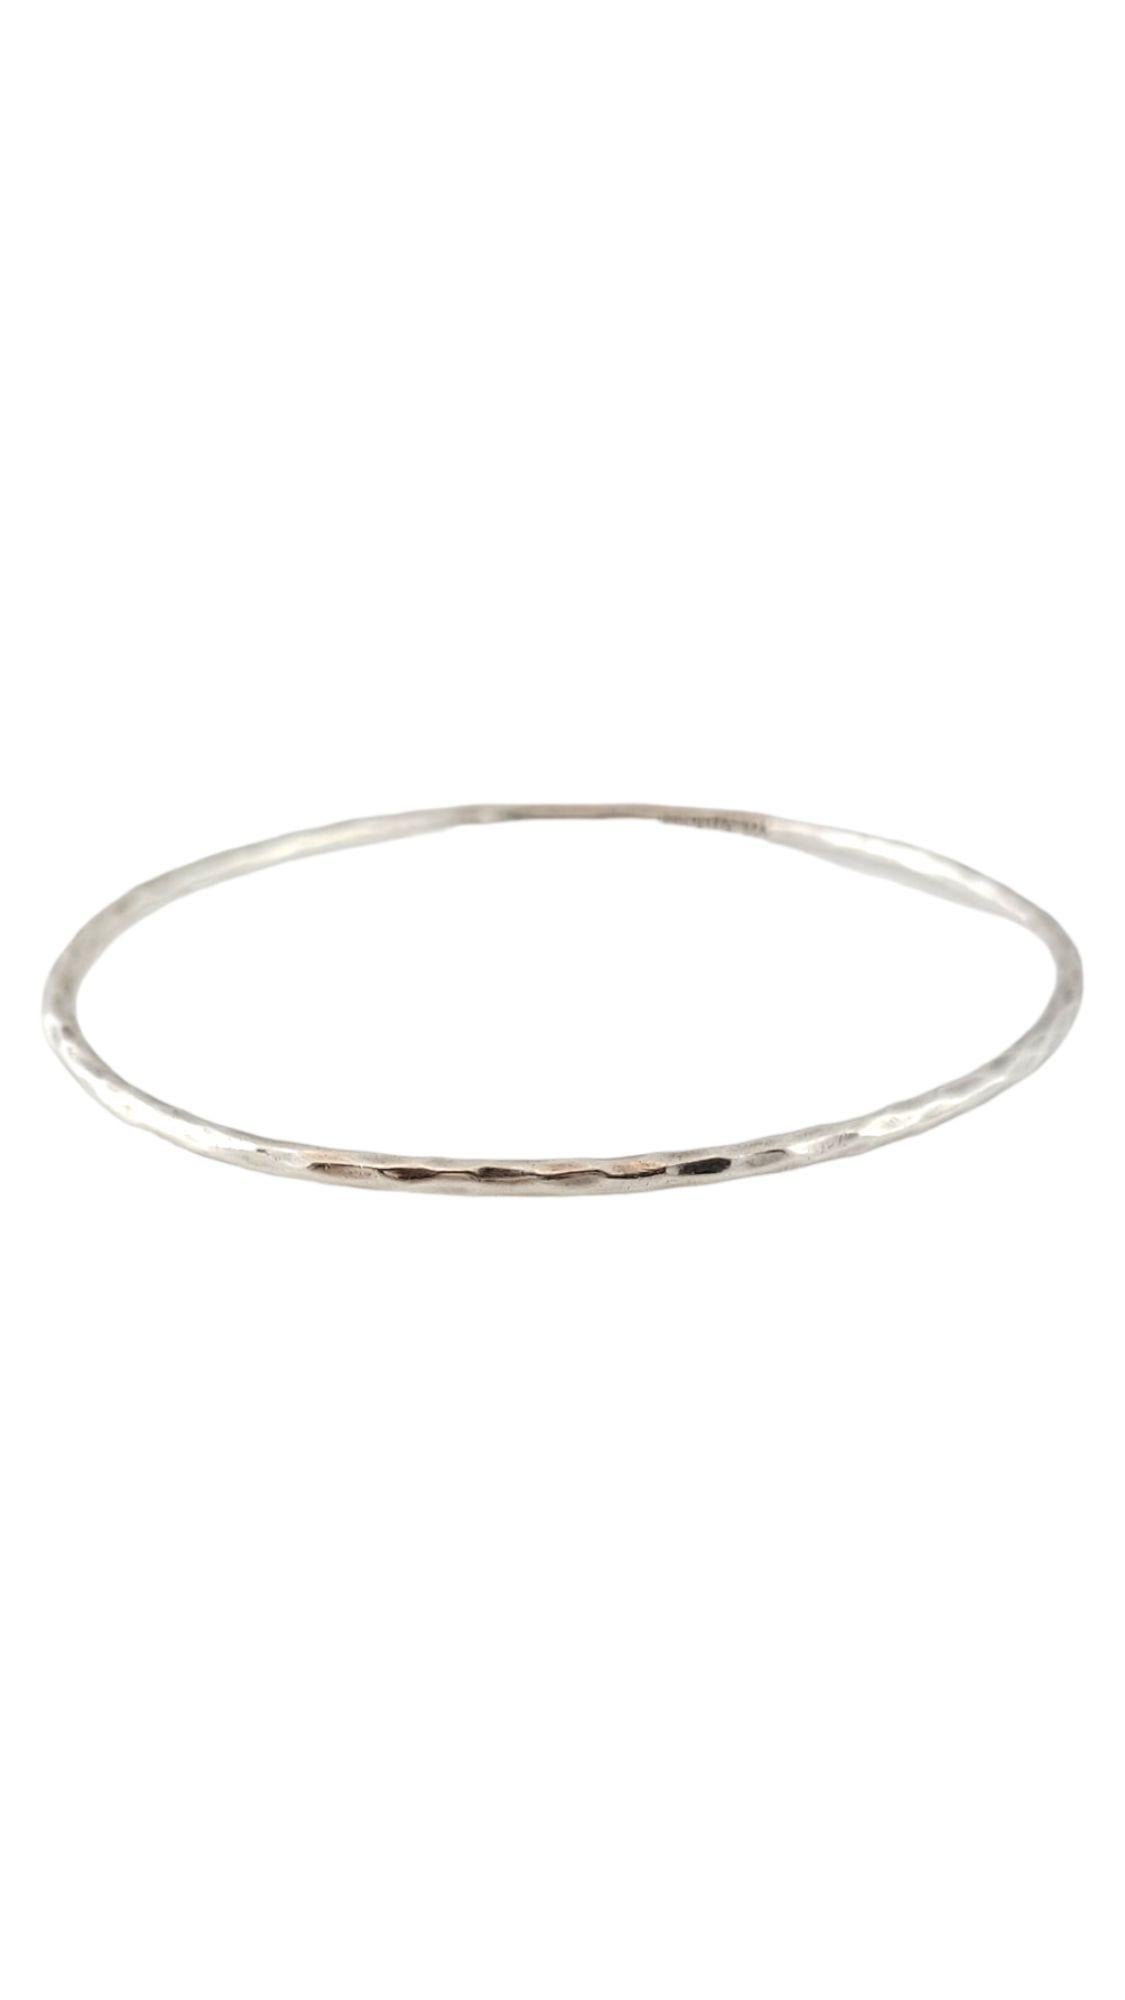 Ippolita 925 Sterling Silver Hammered Bangle

This gorgeous 925 sterling silver hammered bangle is by designer Ippolita!

Size: 7.5